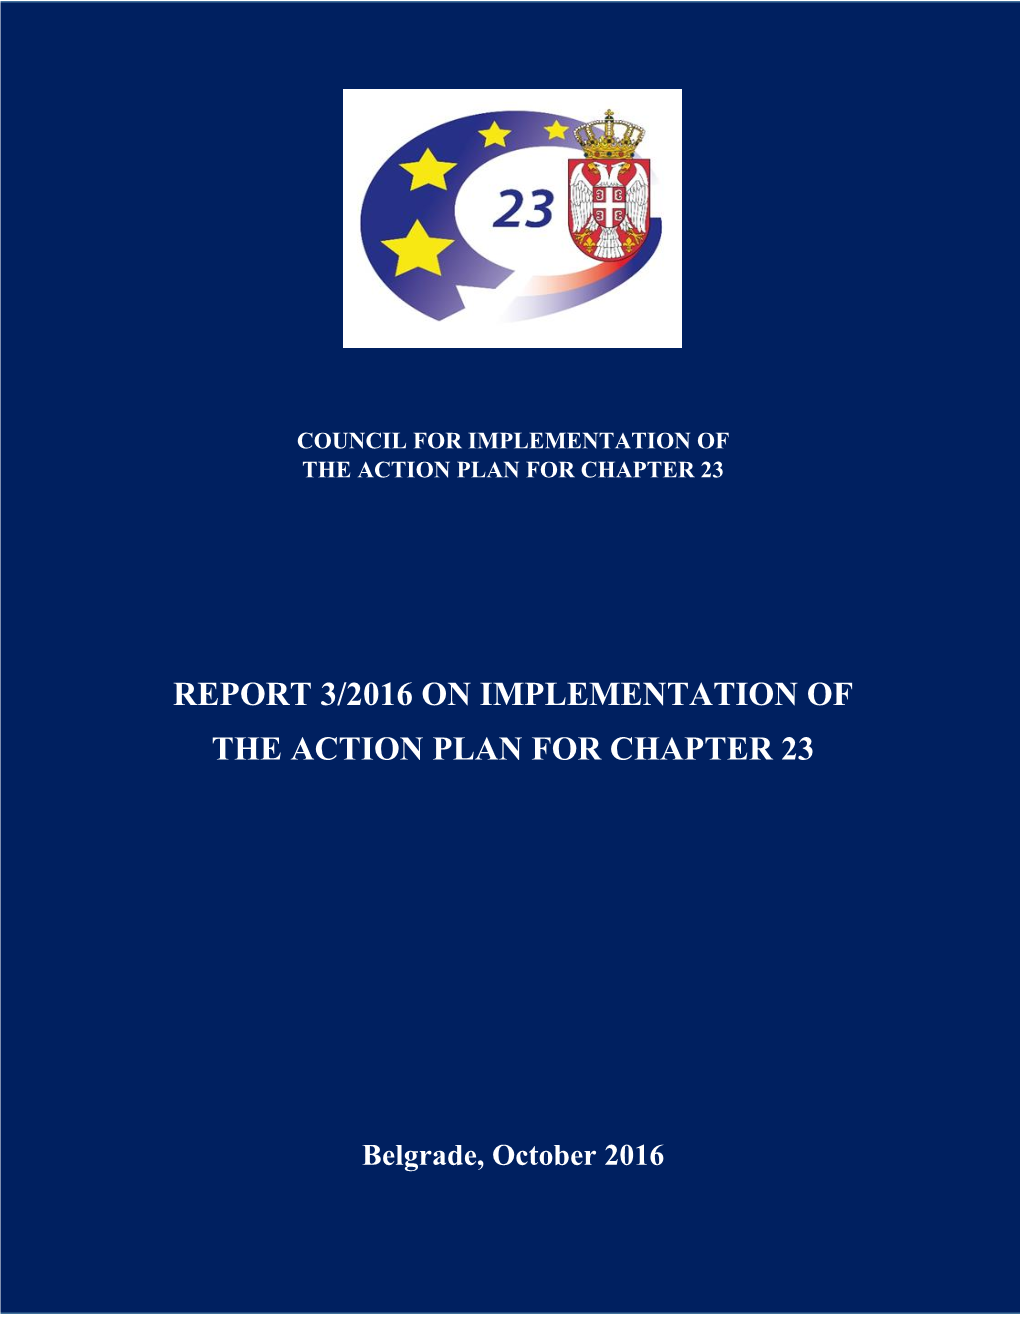 Report 3/2016 on Implementation of the Action Plan for Chapter 23